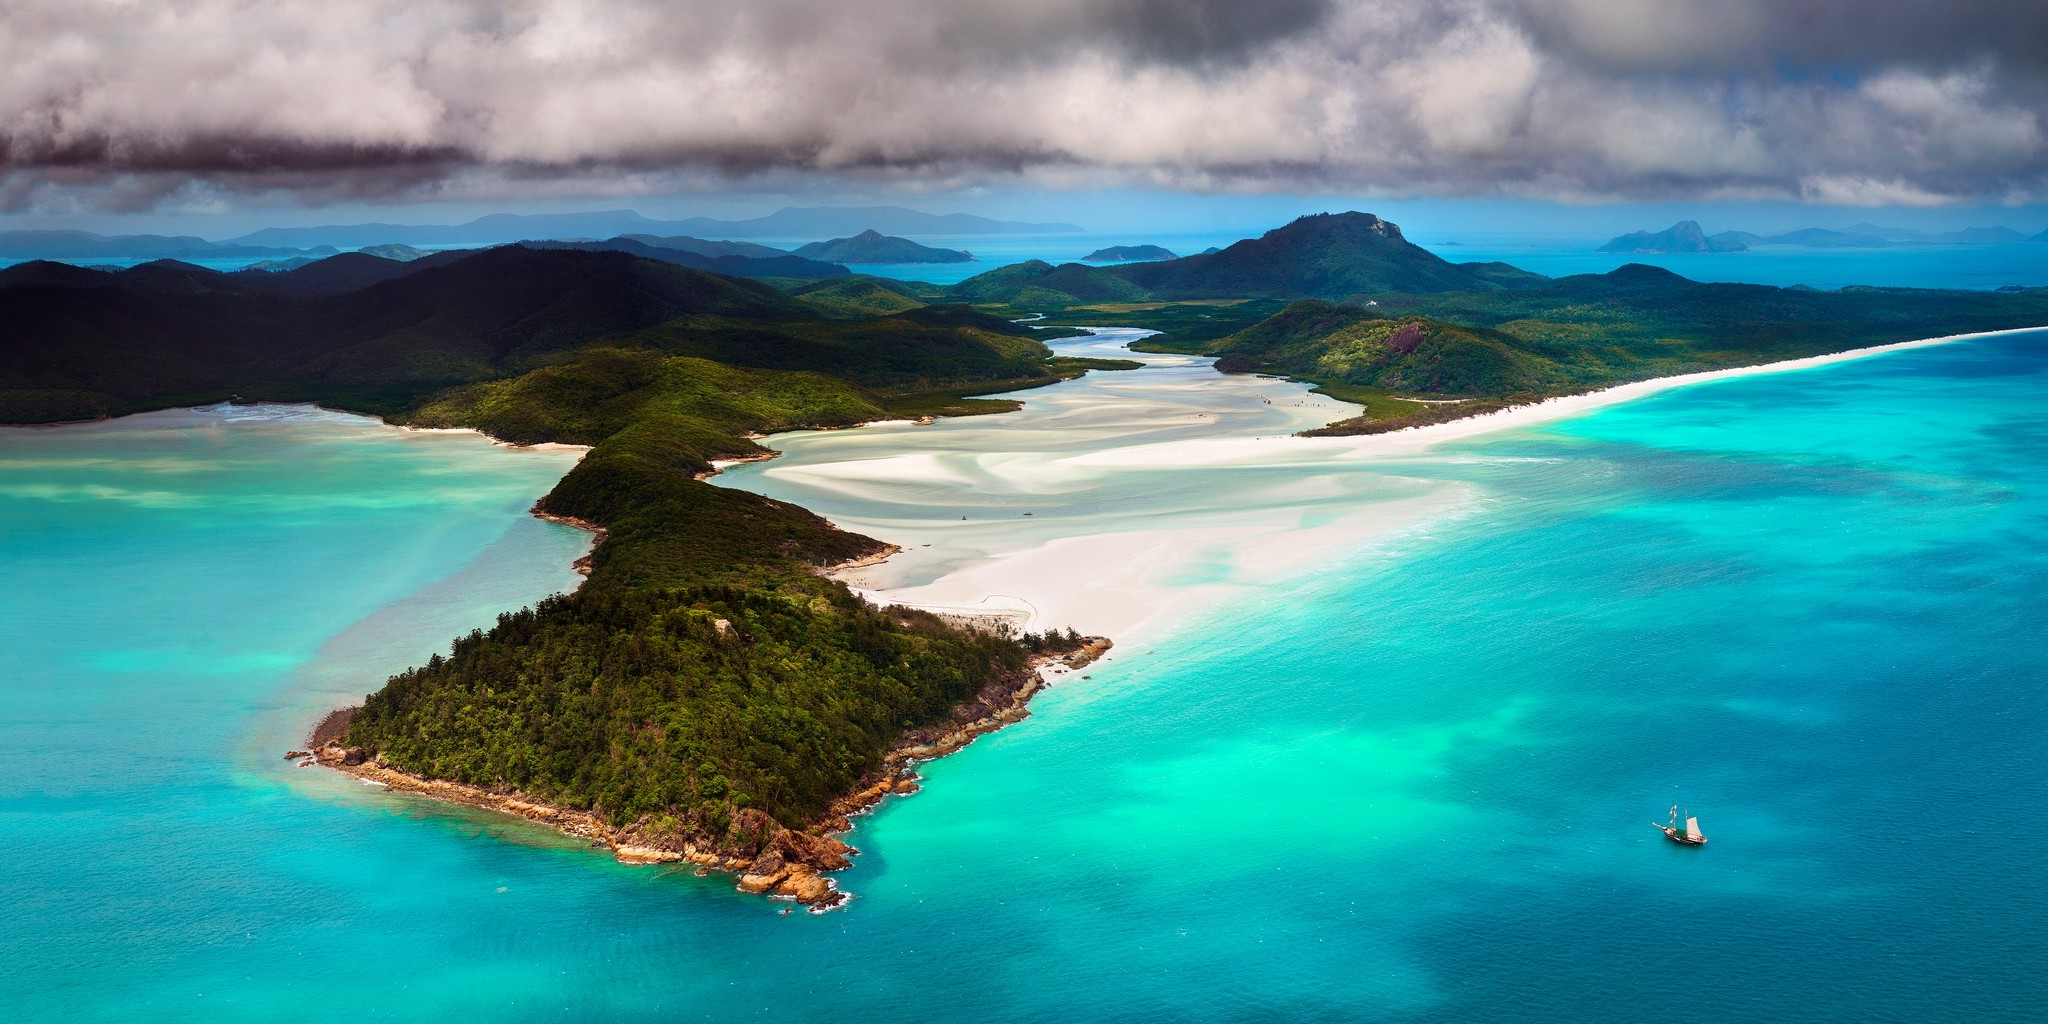 beach, Island, Australia, Sea, Sailboats, Sand, Clouds, Forest, Mountain, Turquoise, Water, Nature, Landscape, Aerial View Wallpaper